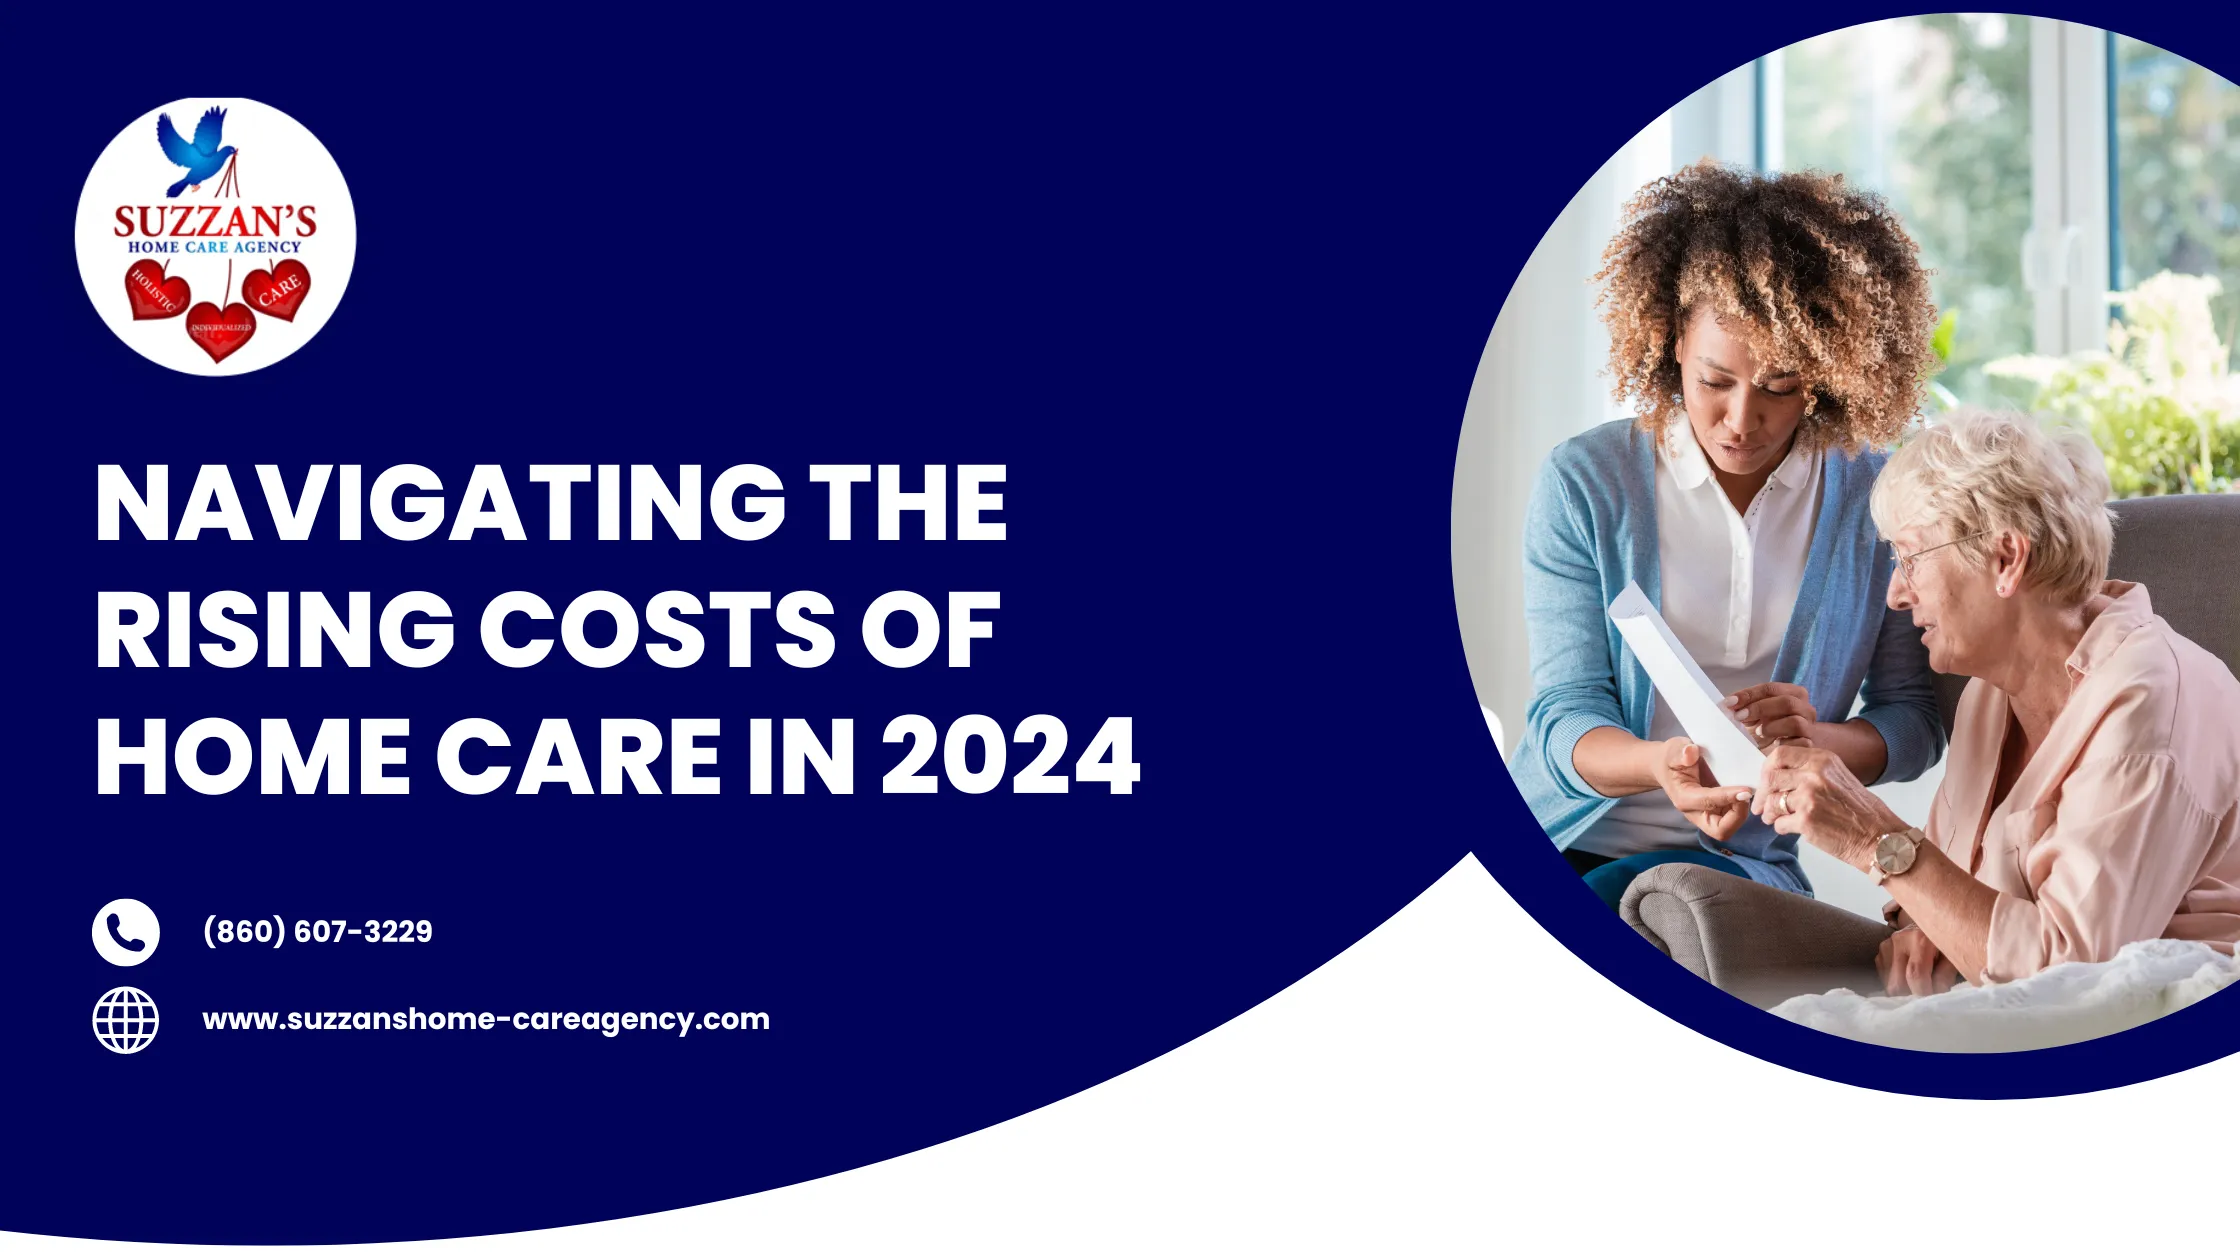 Navigating the Rising Costs of Home Care in 2024